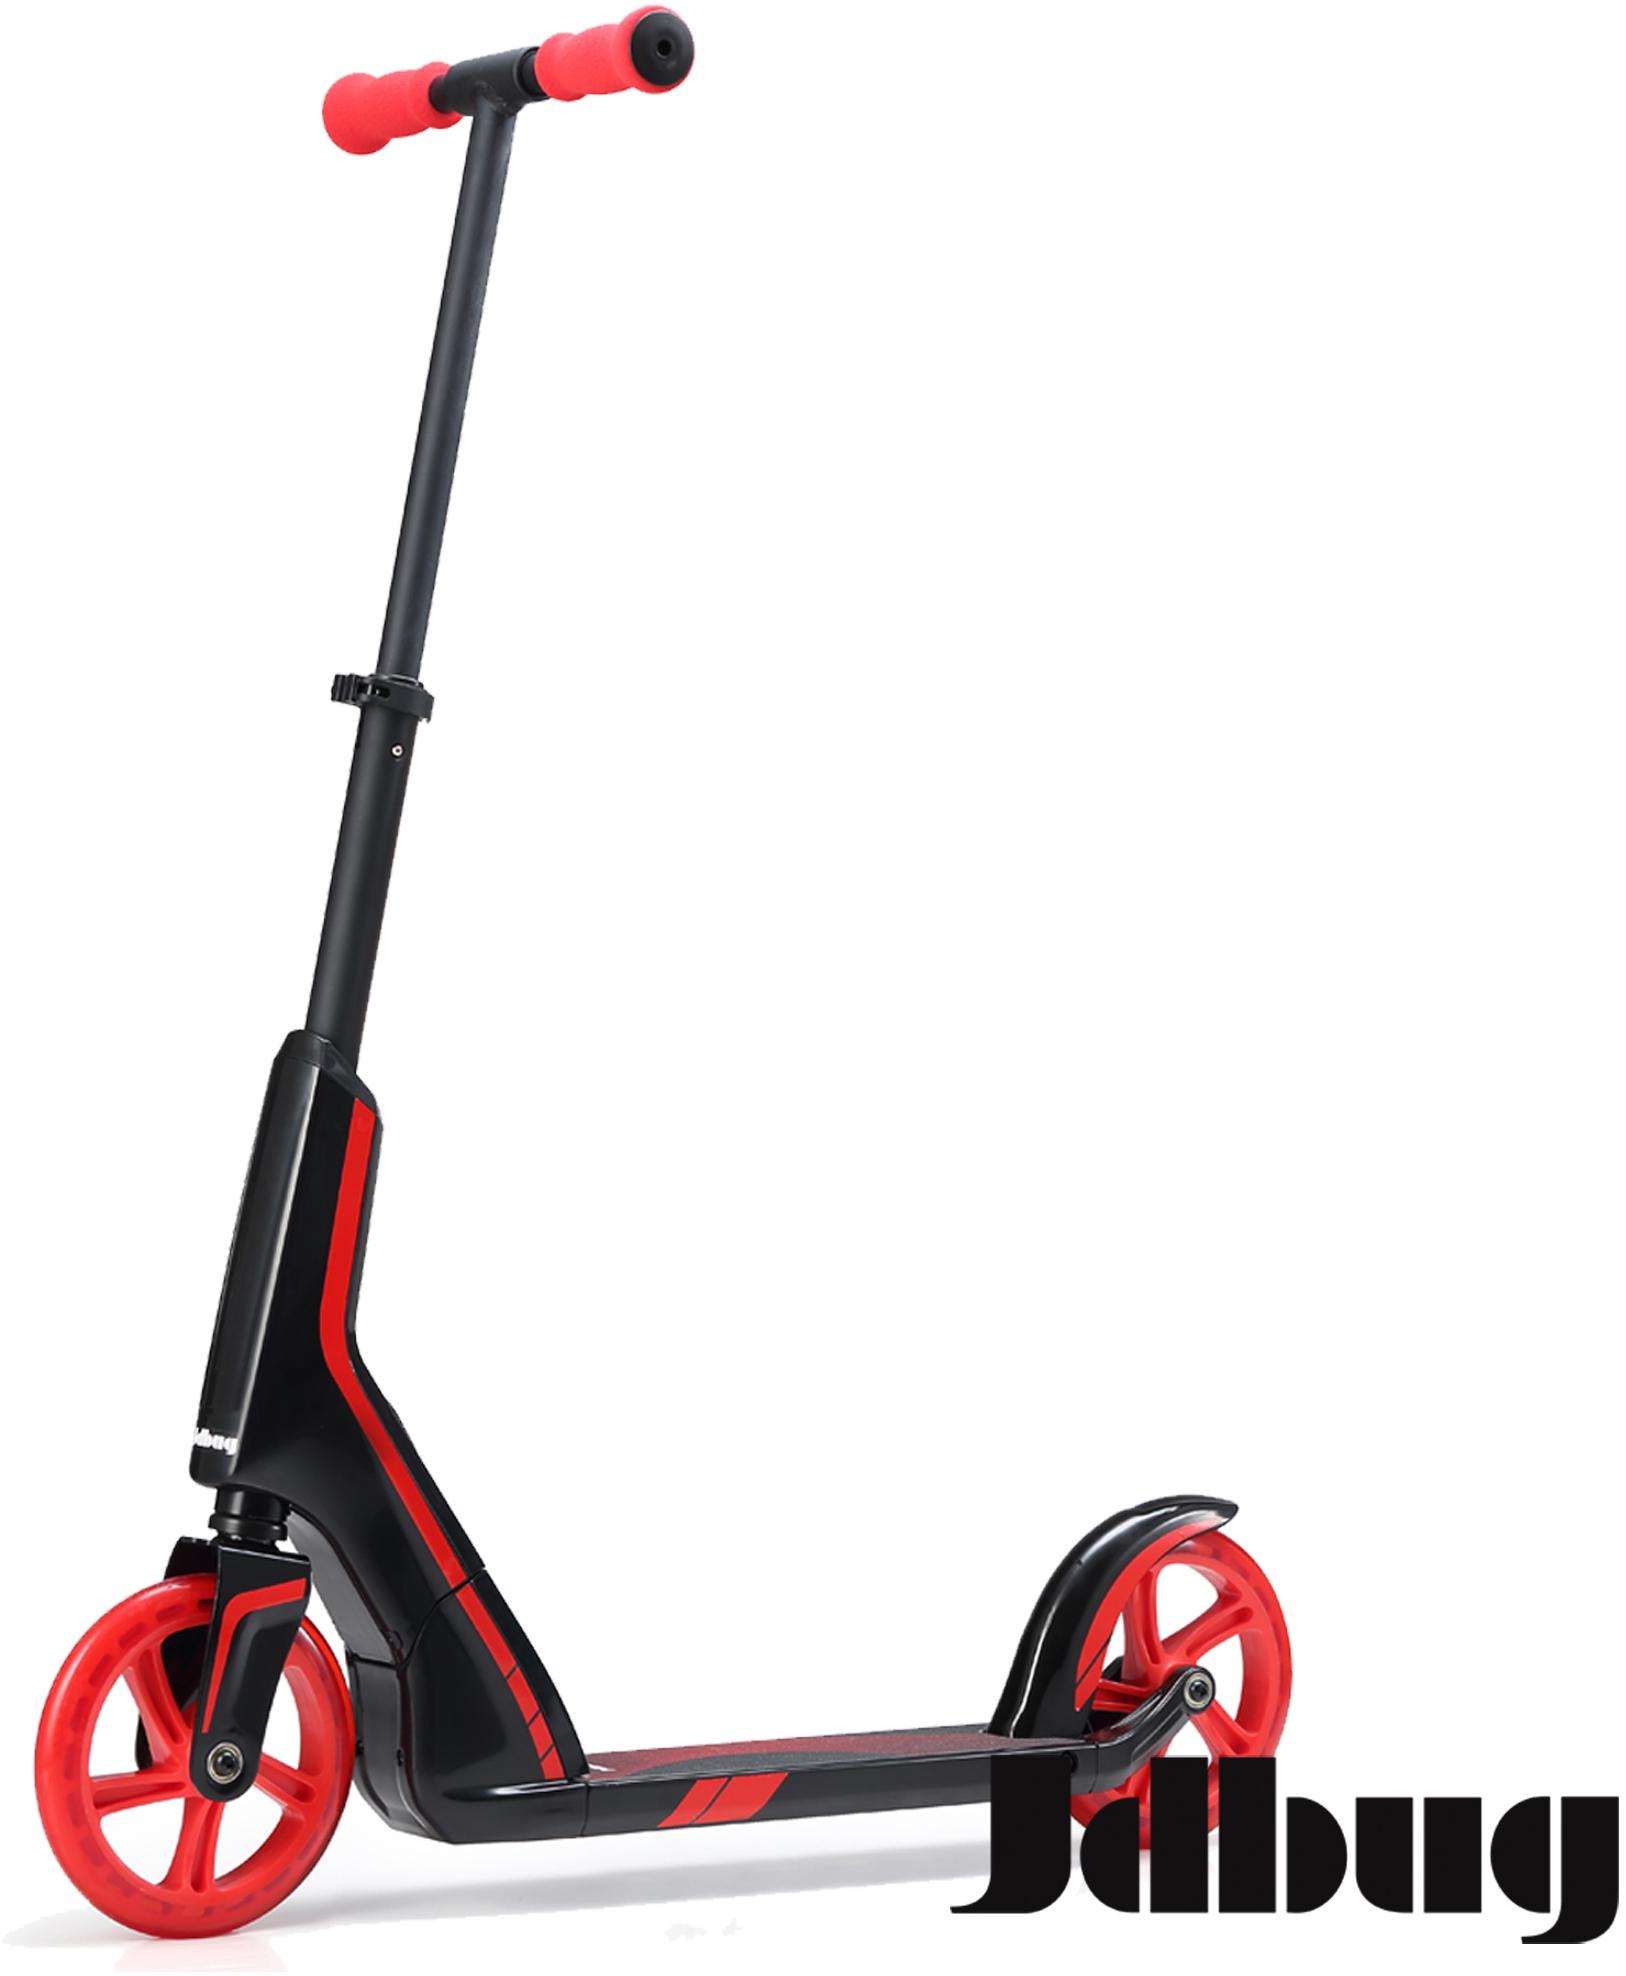 Jd Bug Pro Commute 185 Scooter - Black/Red